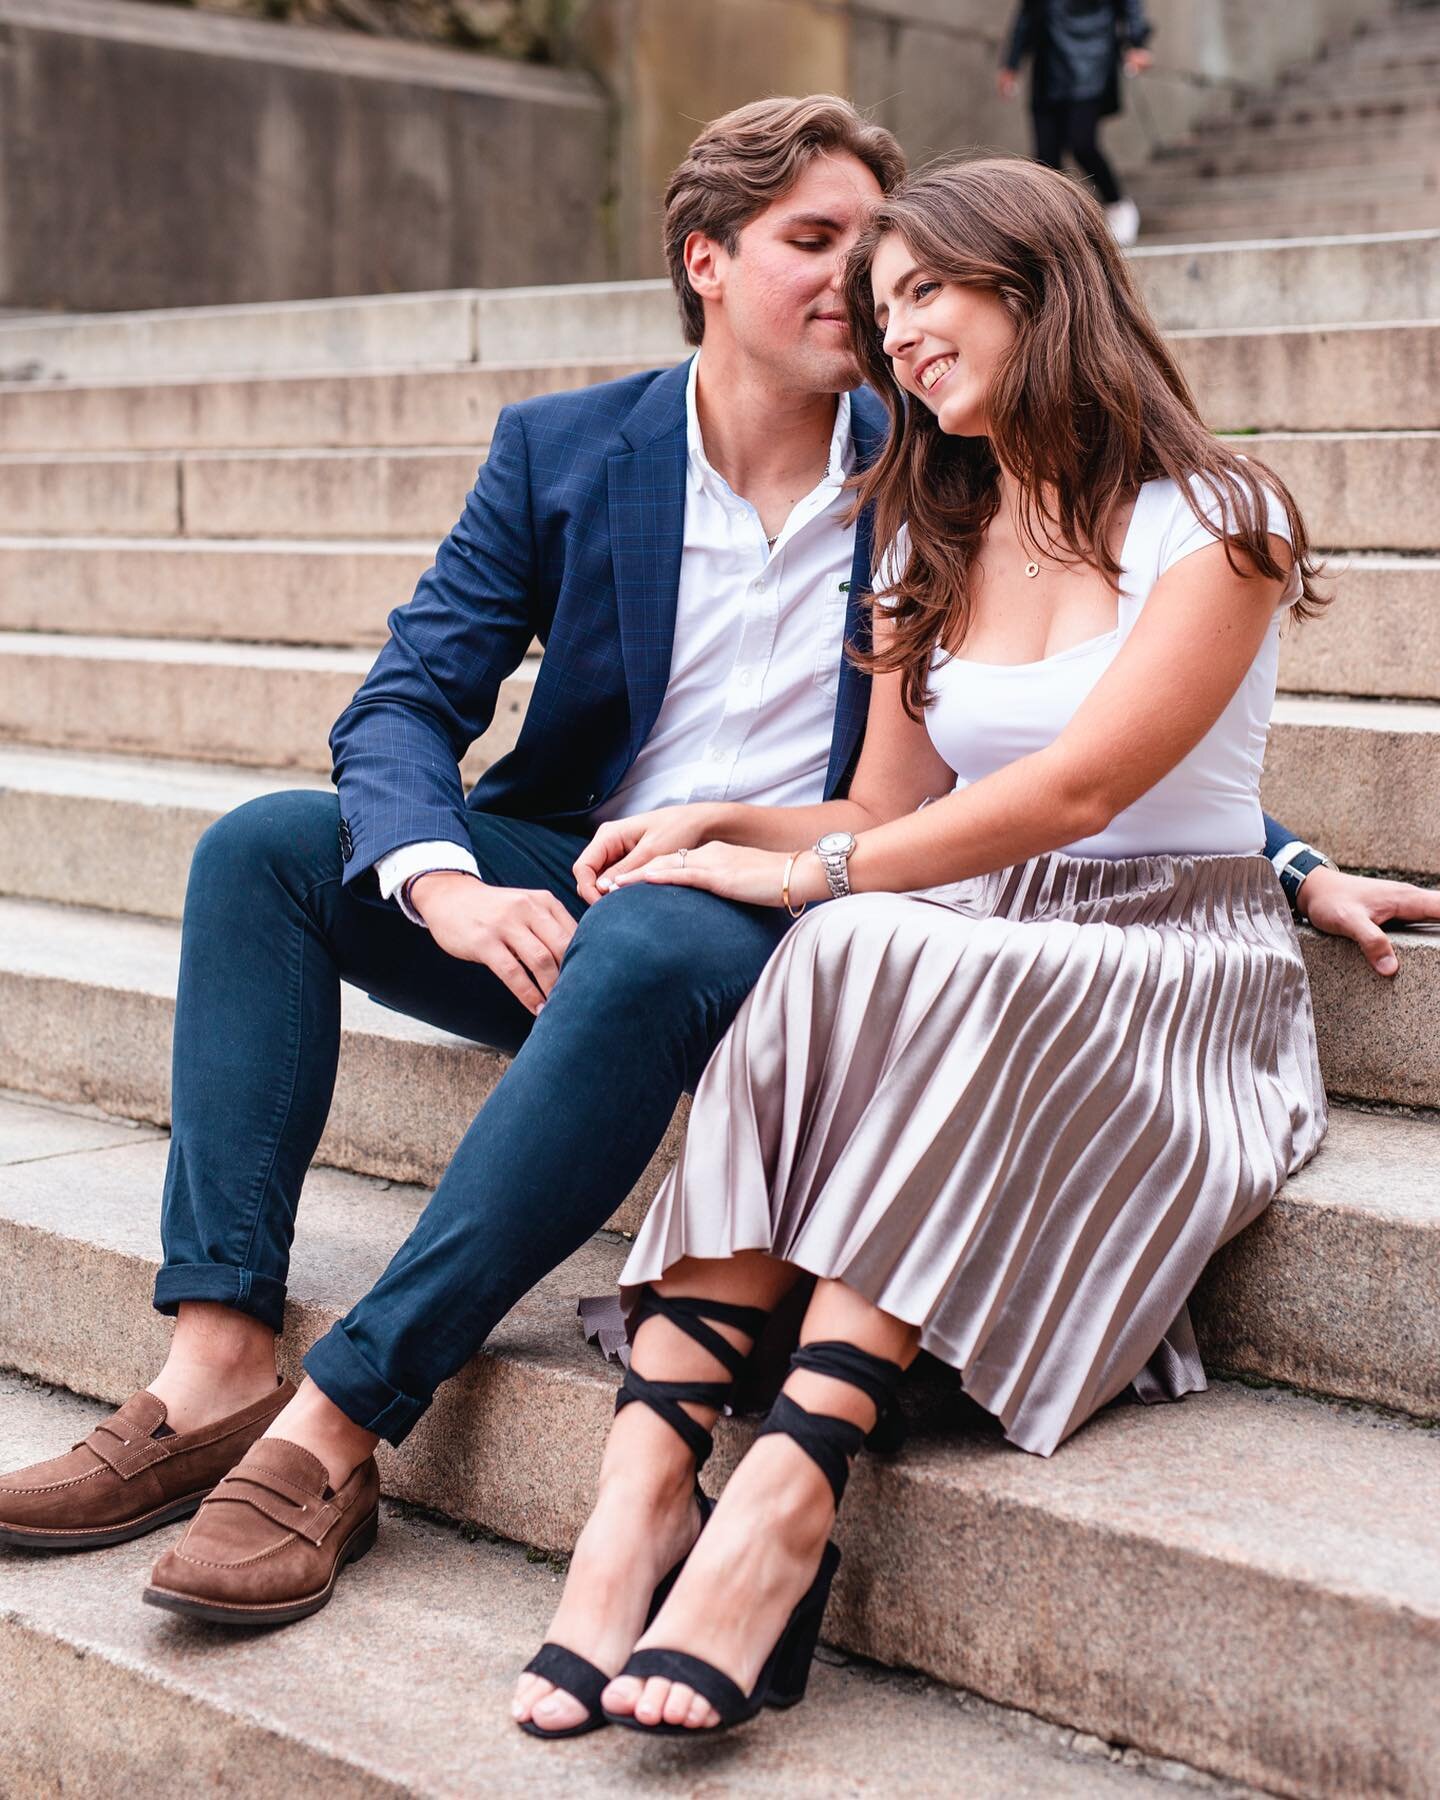 Still obsessed with this New York engagement session last year with Gabriel and Paulette in Central Park 🏙️ #newyorkengagement #centralparknyc